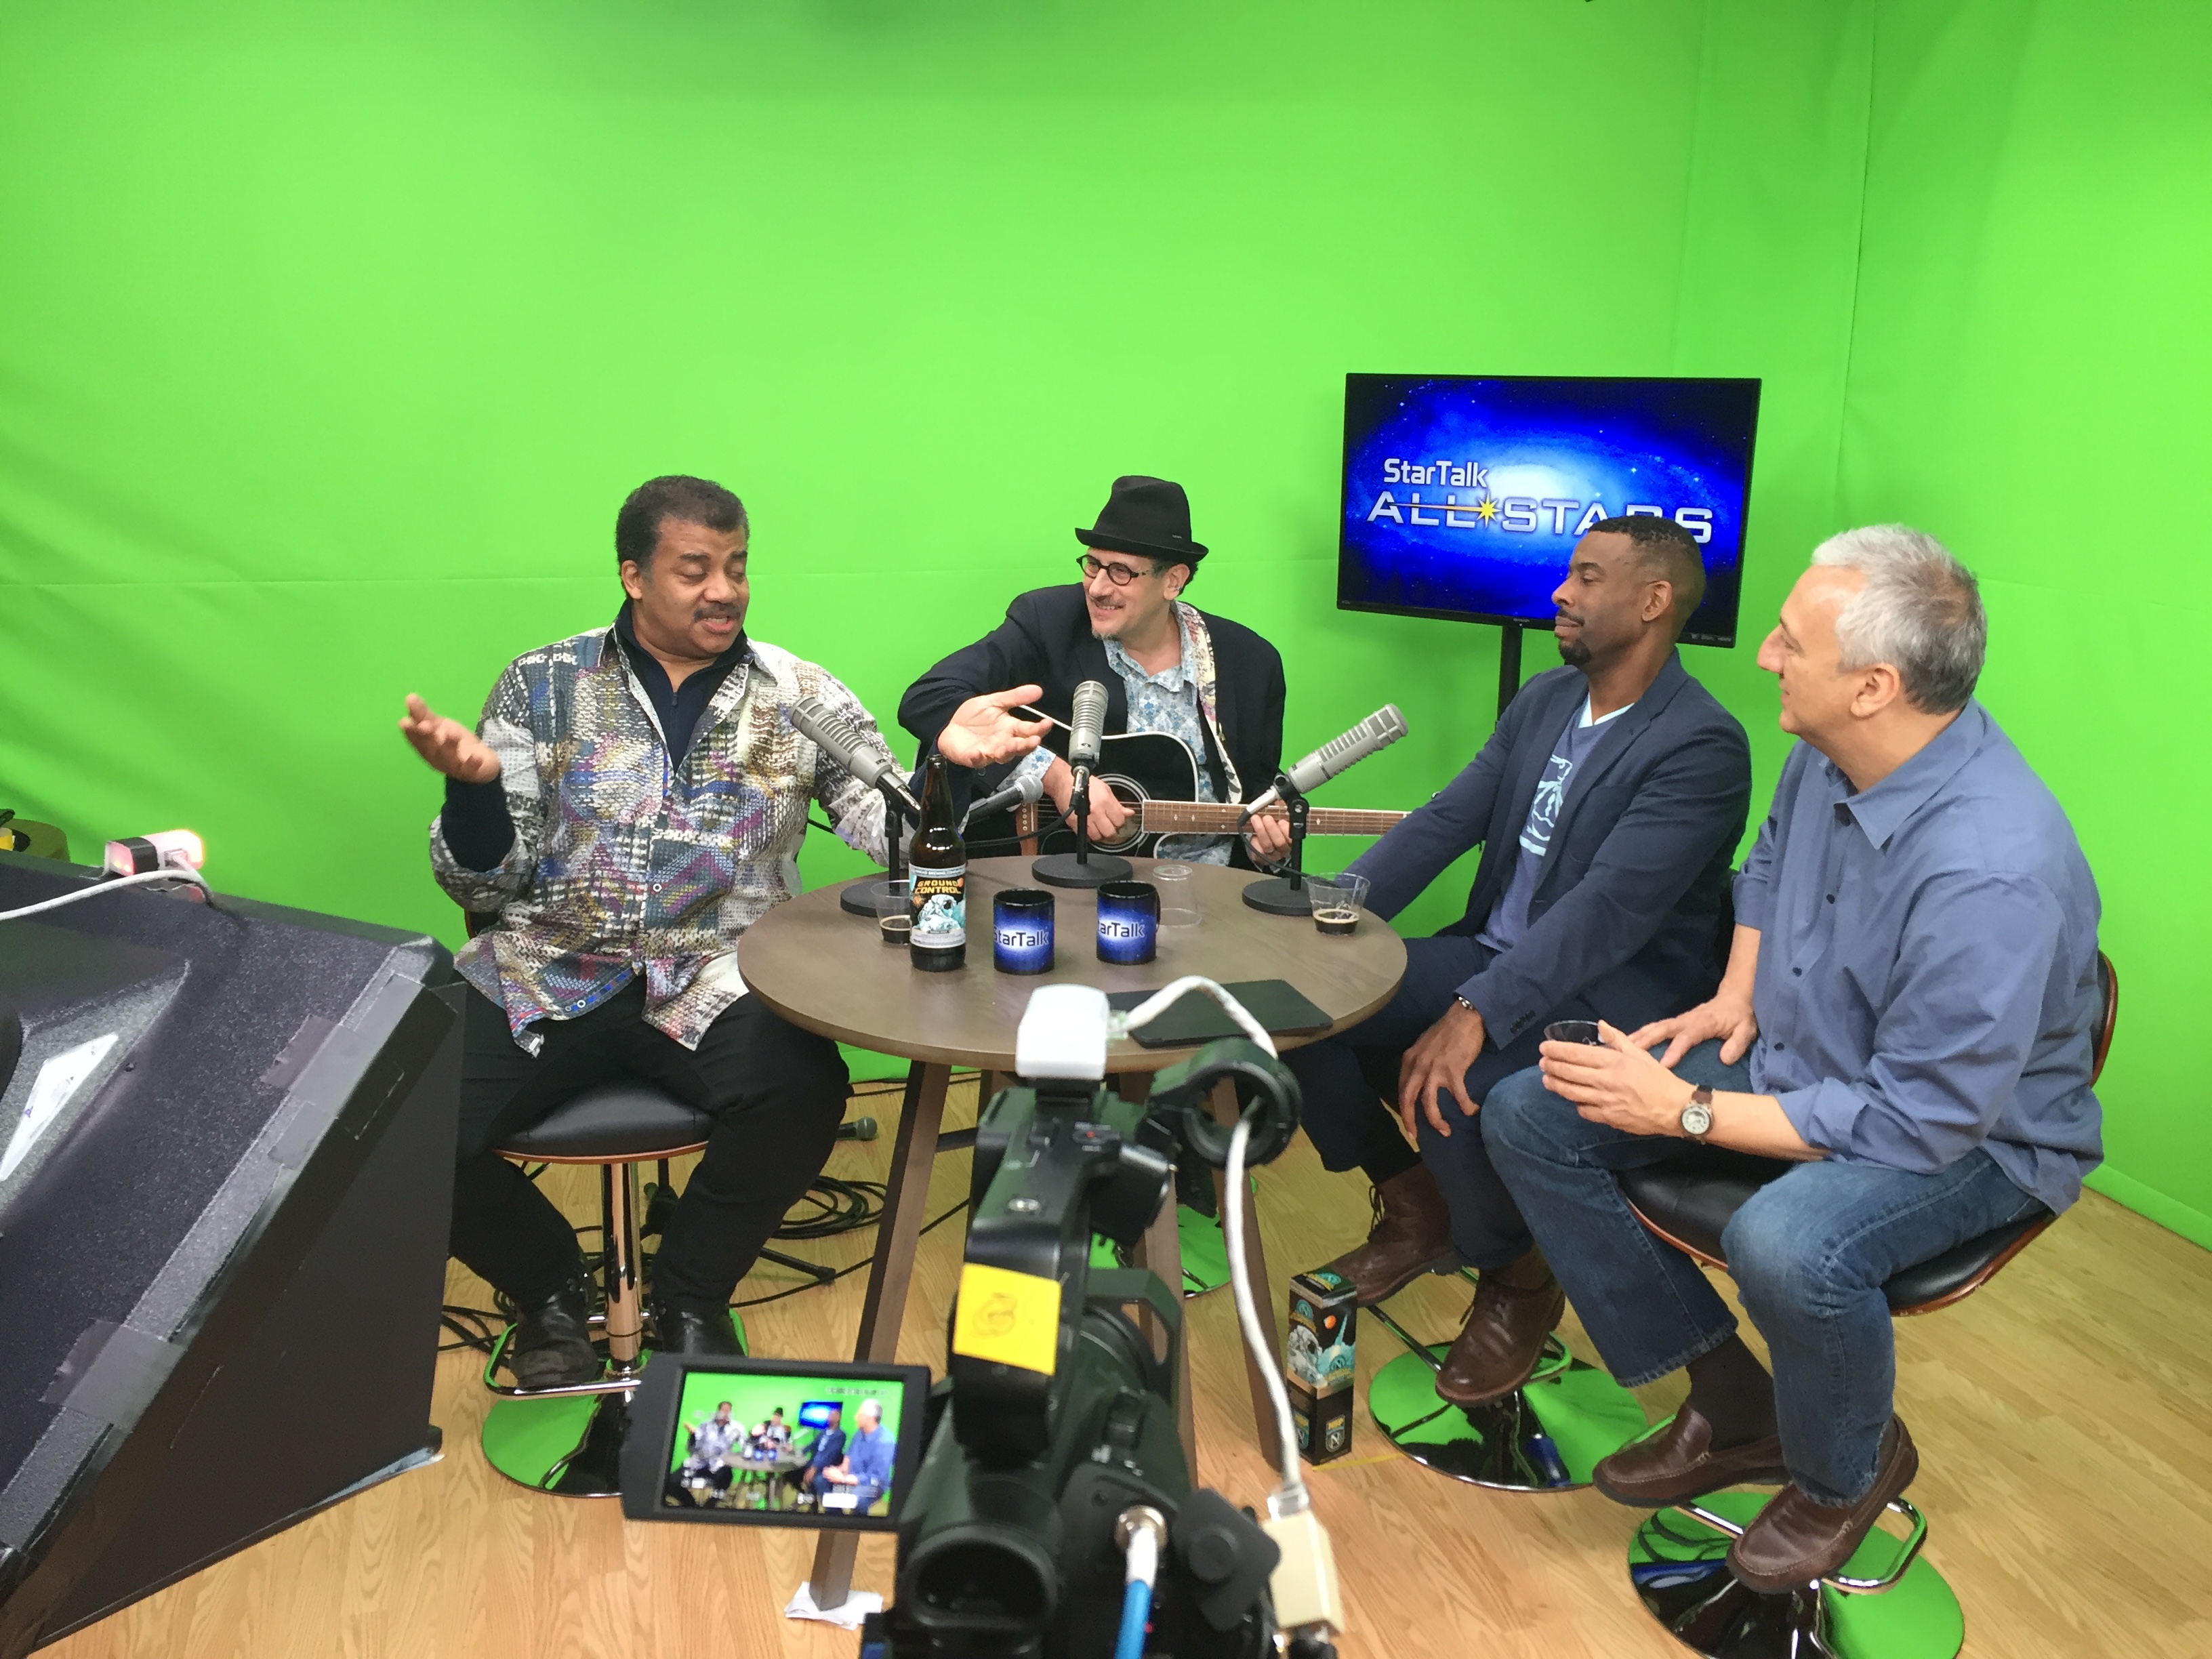 Late night StarTalk All-Stars podcasting with (L-R) Neil deGrasse Tyson, Dr Grinspoon, Chuck Nice and Mike Massimino (astronaut!!)